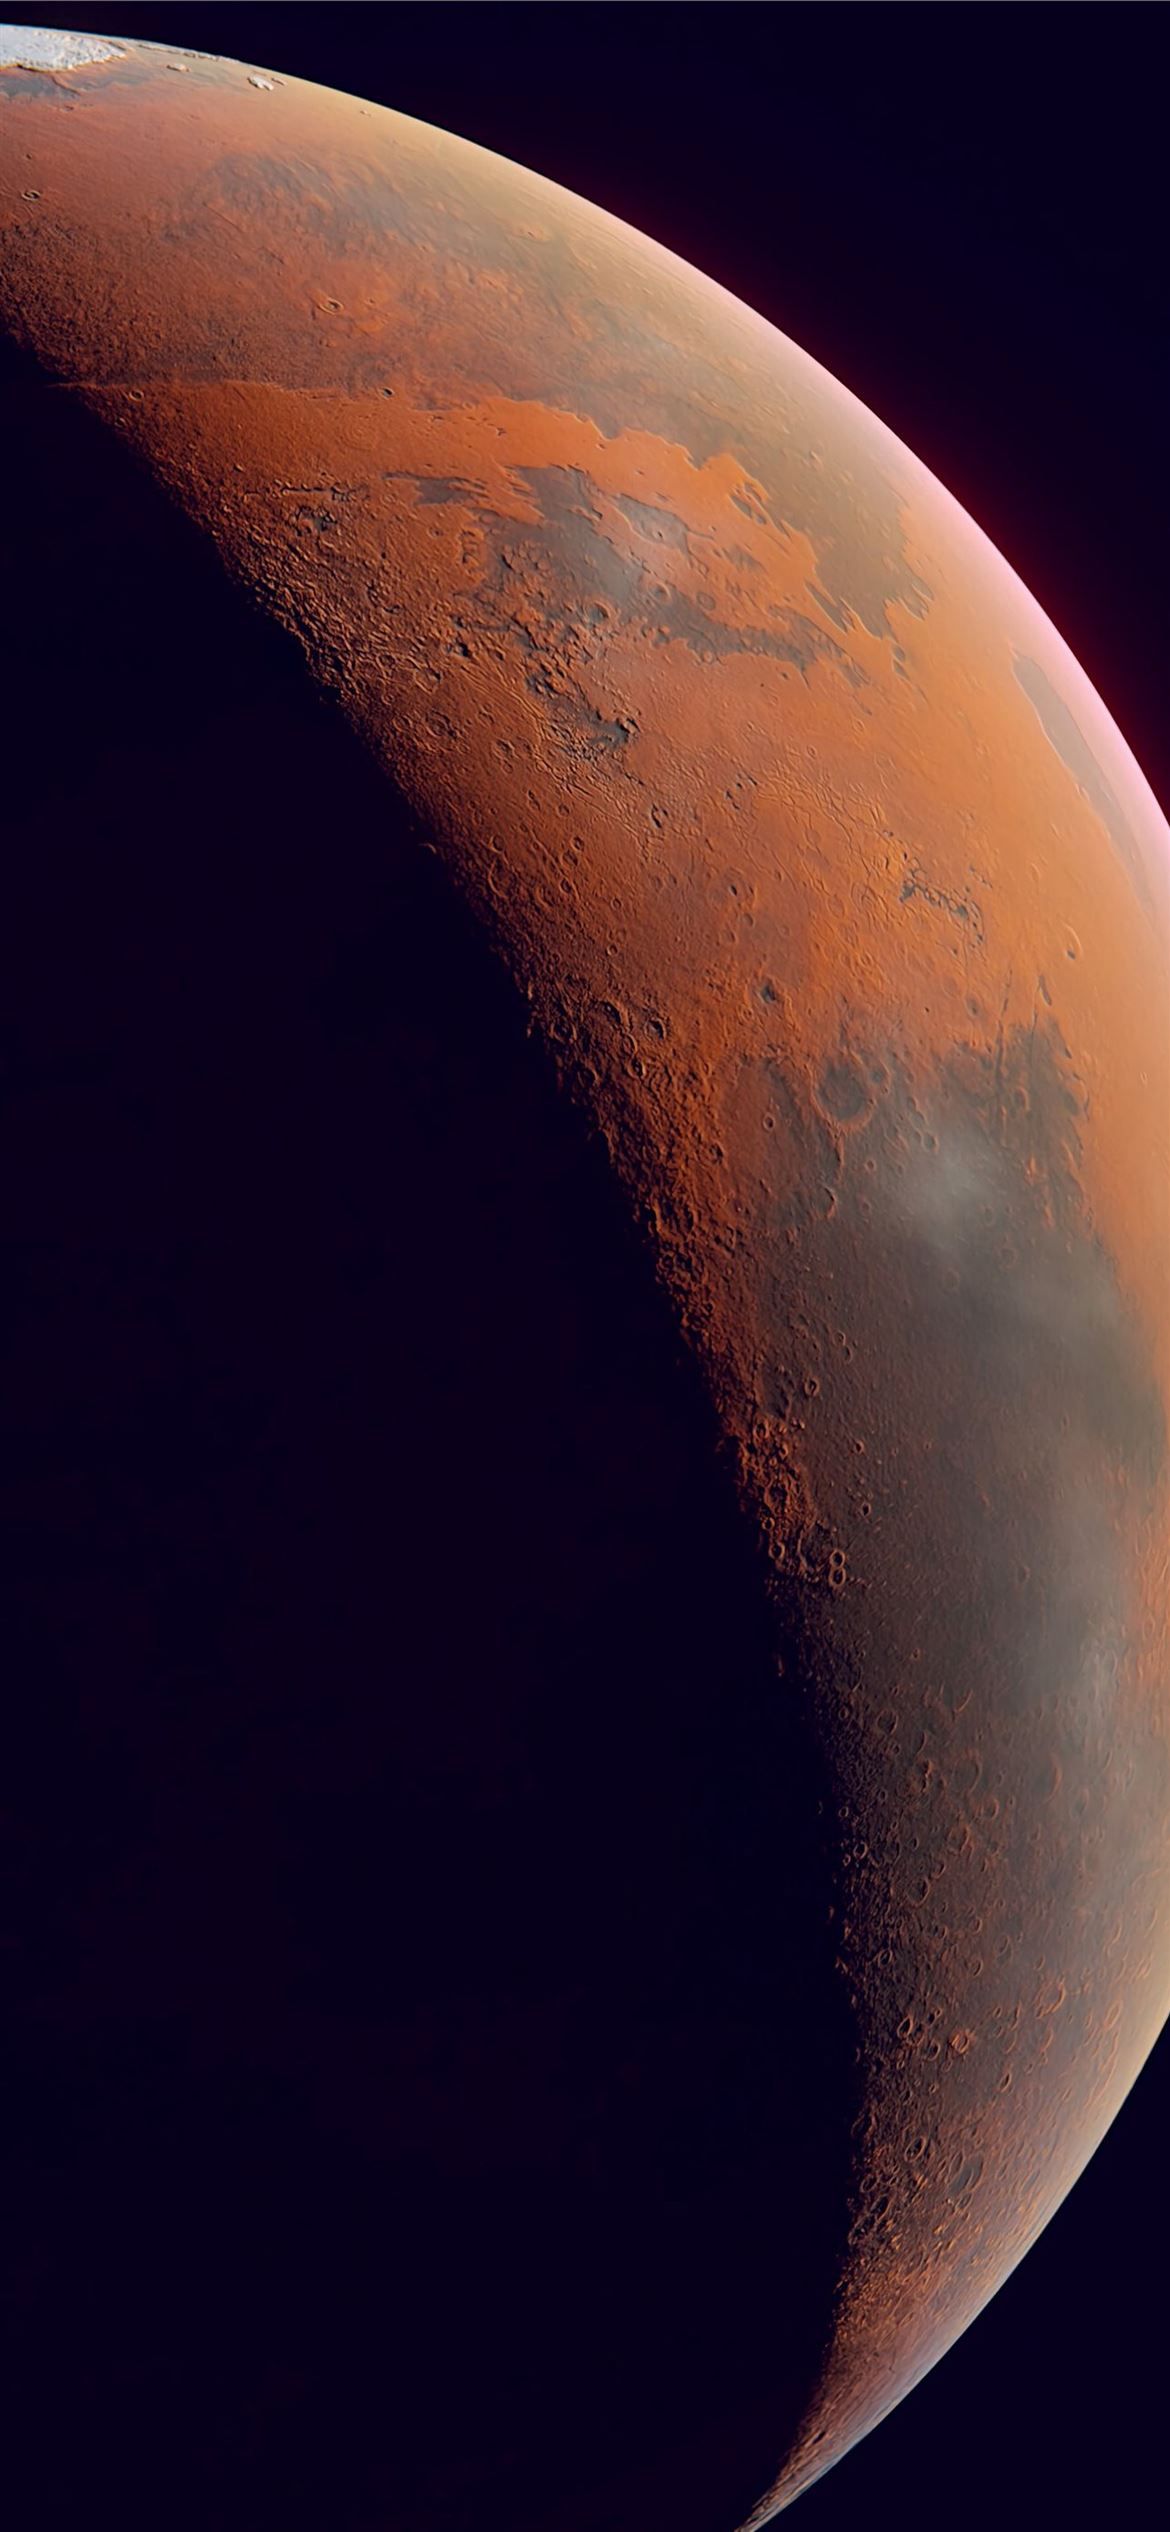 A view of the planet mars from space - Mars